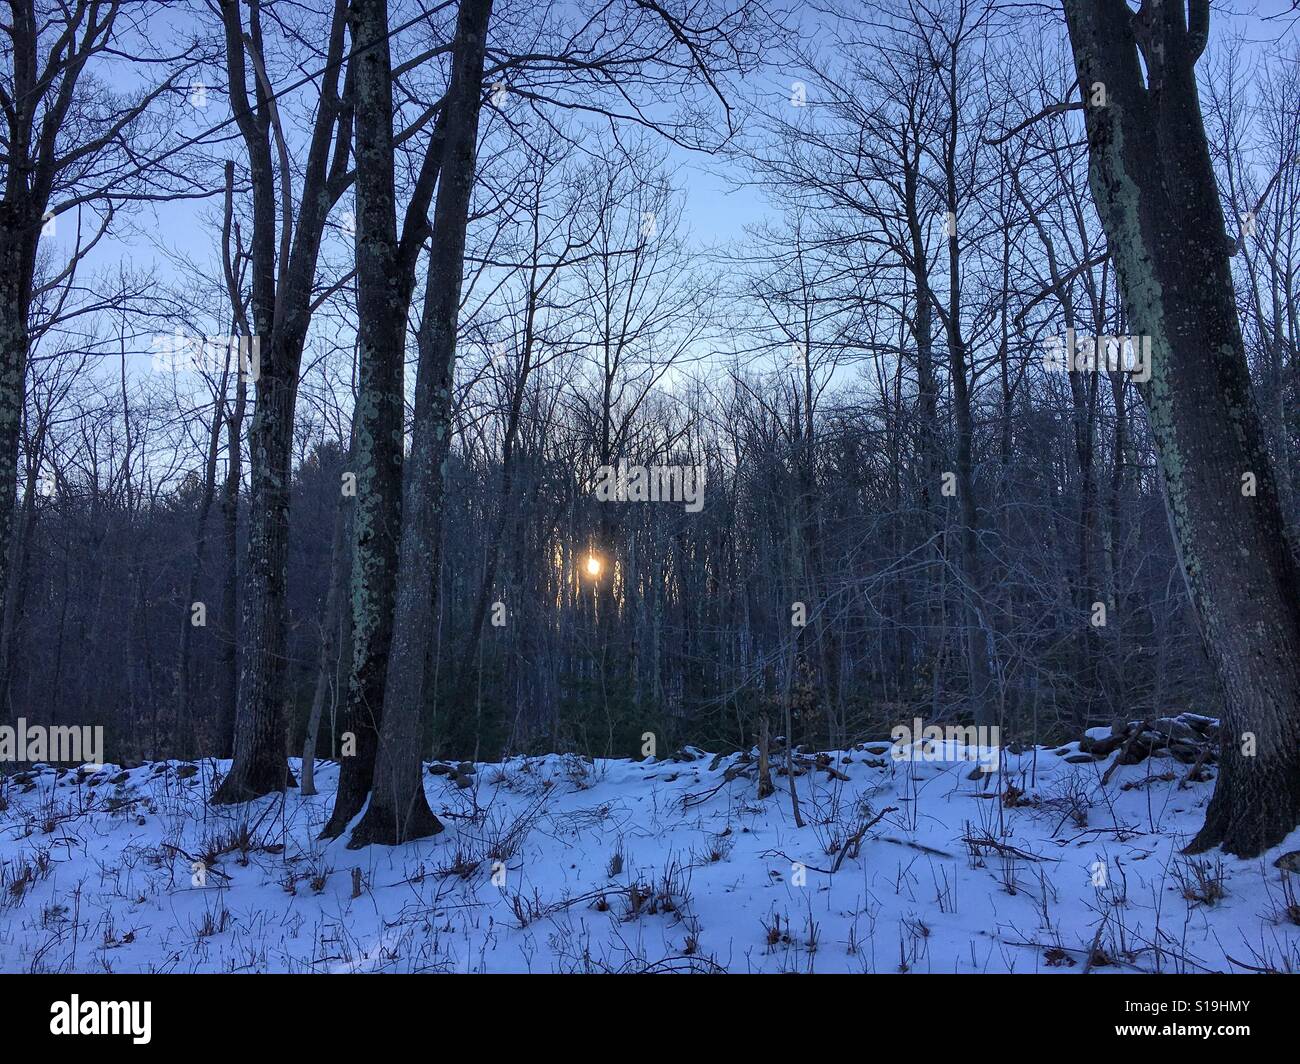 Sunset through the forest during winter in western Massachusetts.  Shot in the town of sandisfield in the Berkshires. Stock Photo